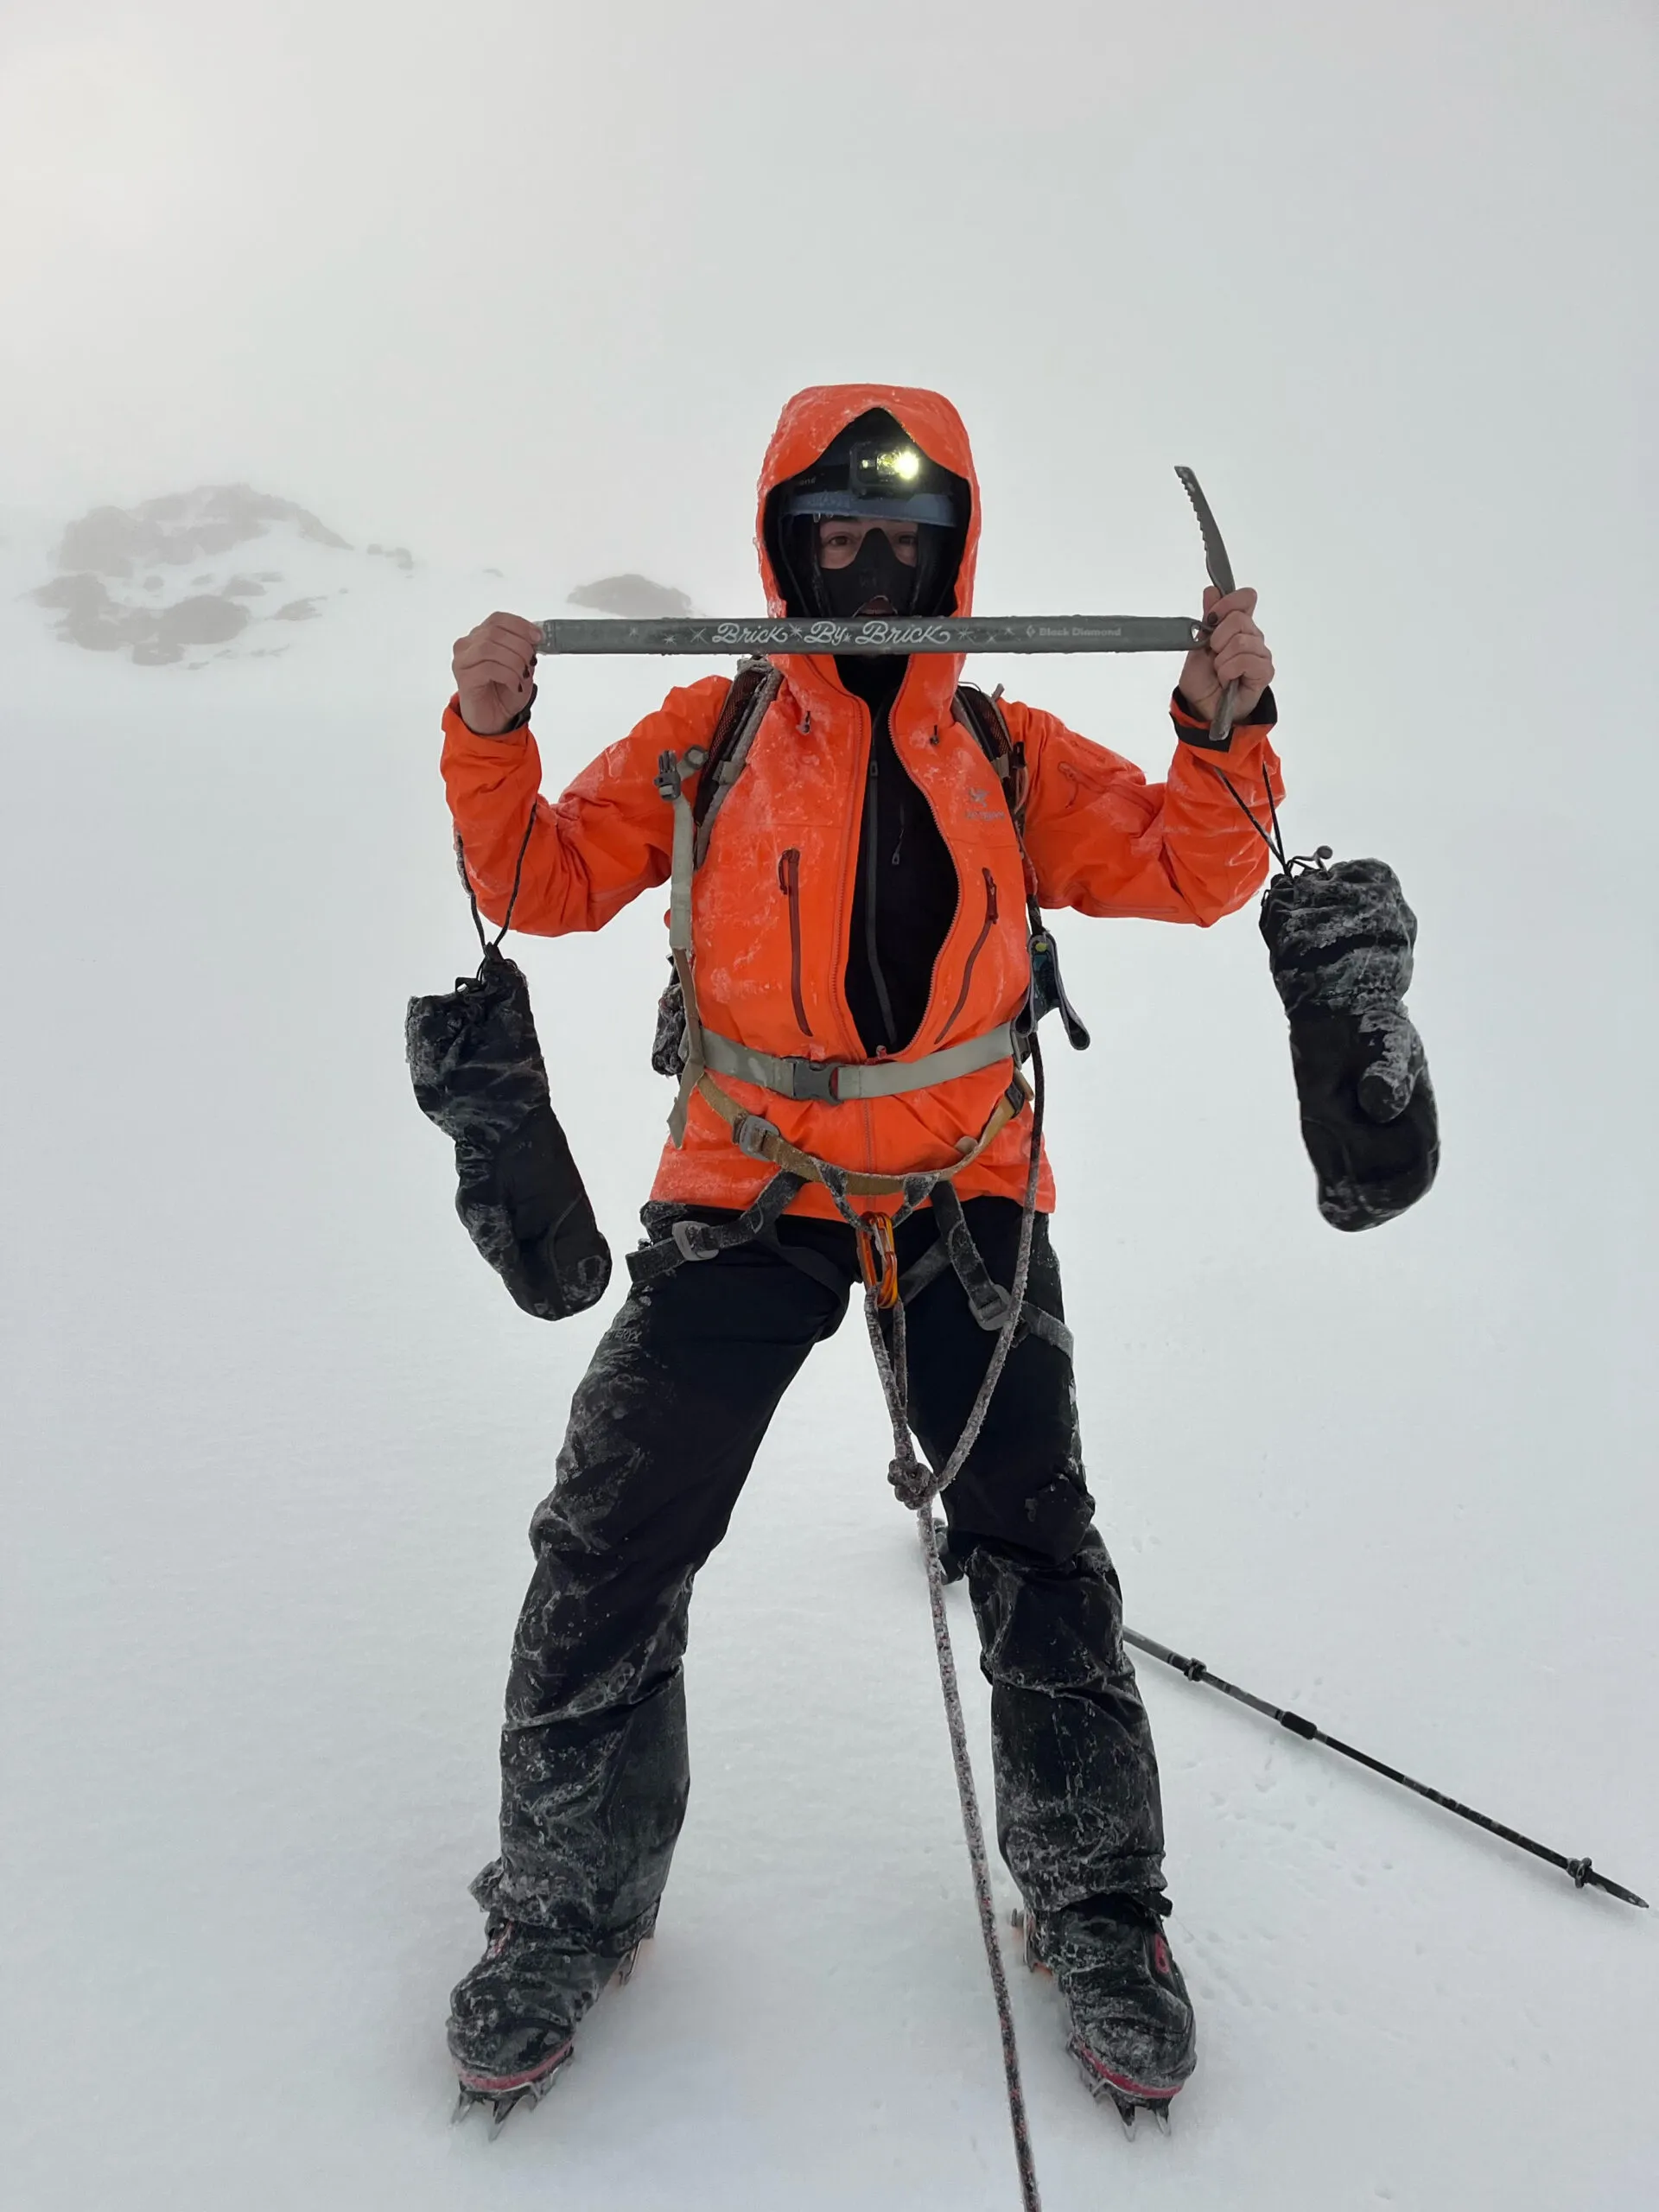 Sarah in an orange winter jacket with black pants holding up an ice axe.